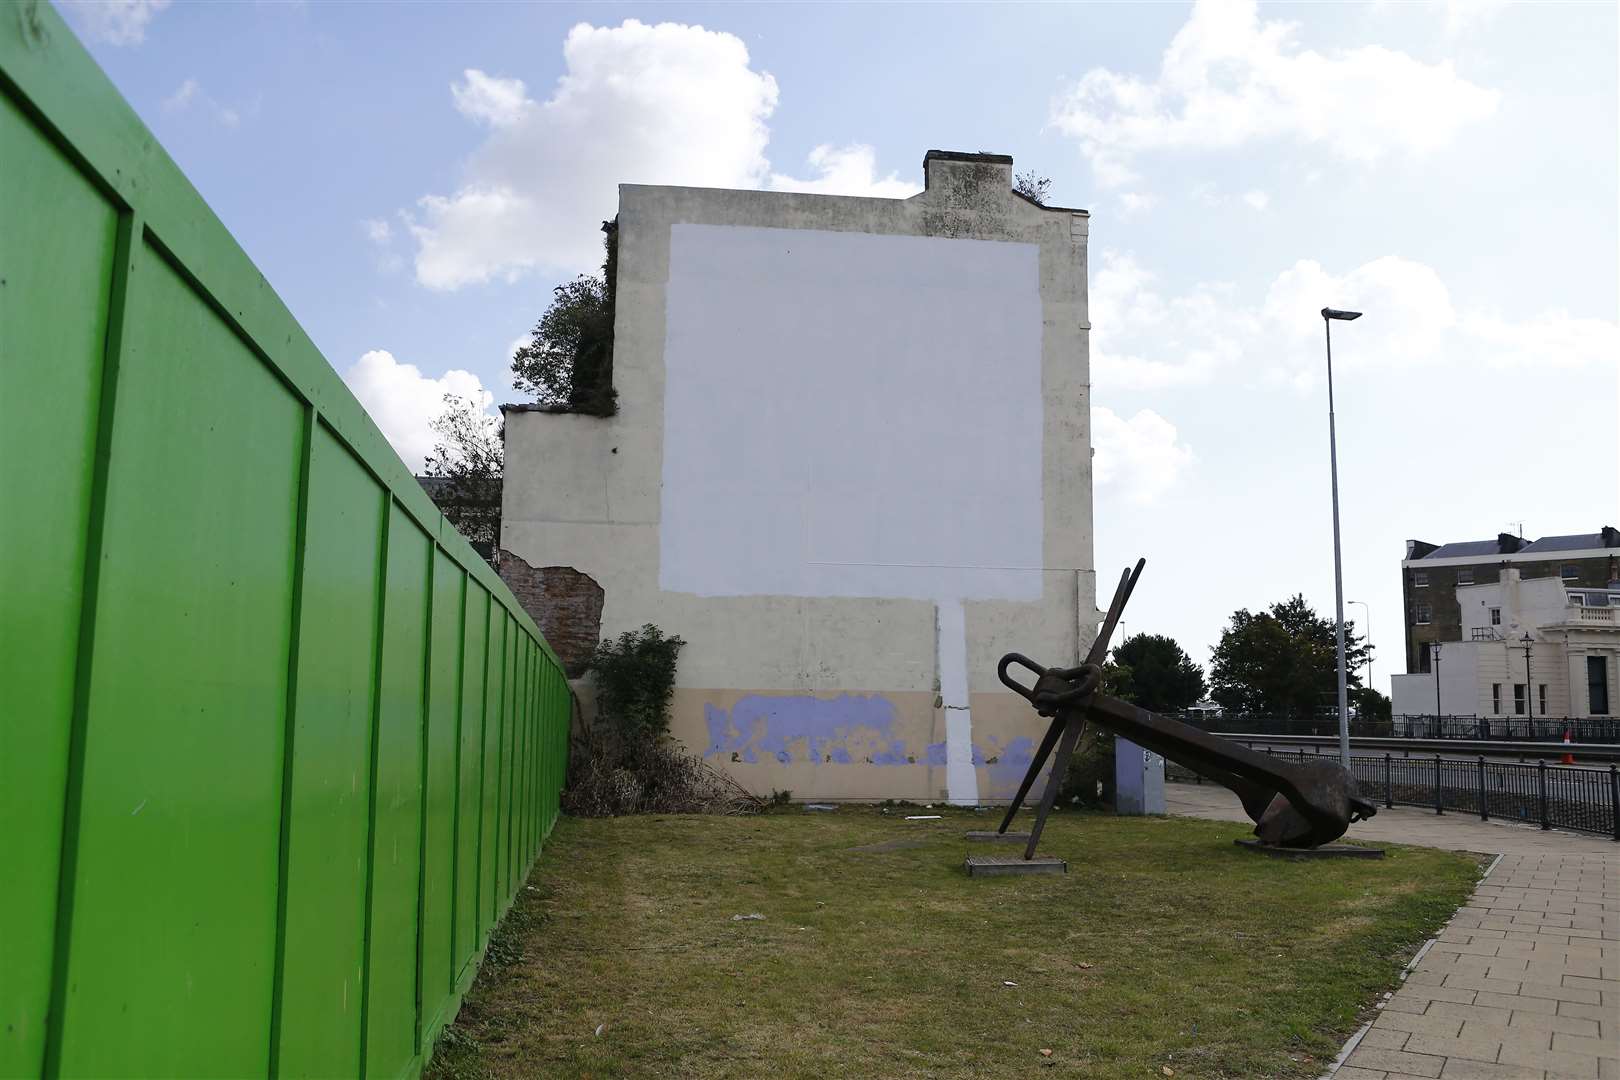 The artwork is now hidden behind white paint on this wall scheduled for demolition. Picture: Matt Bristow